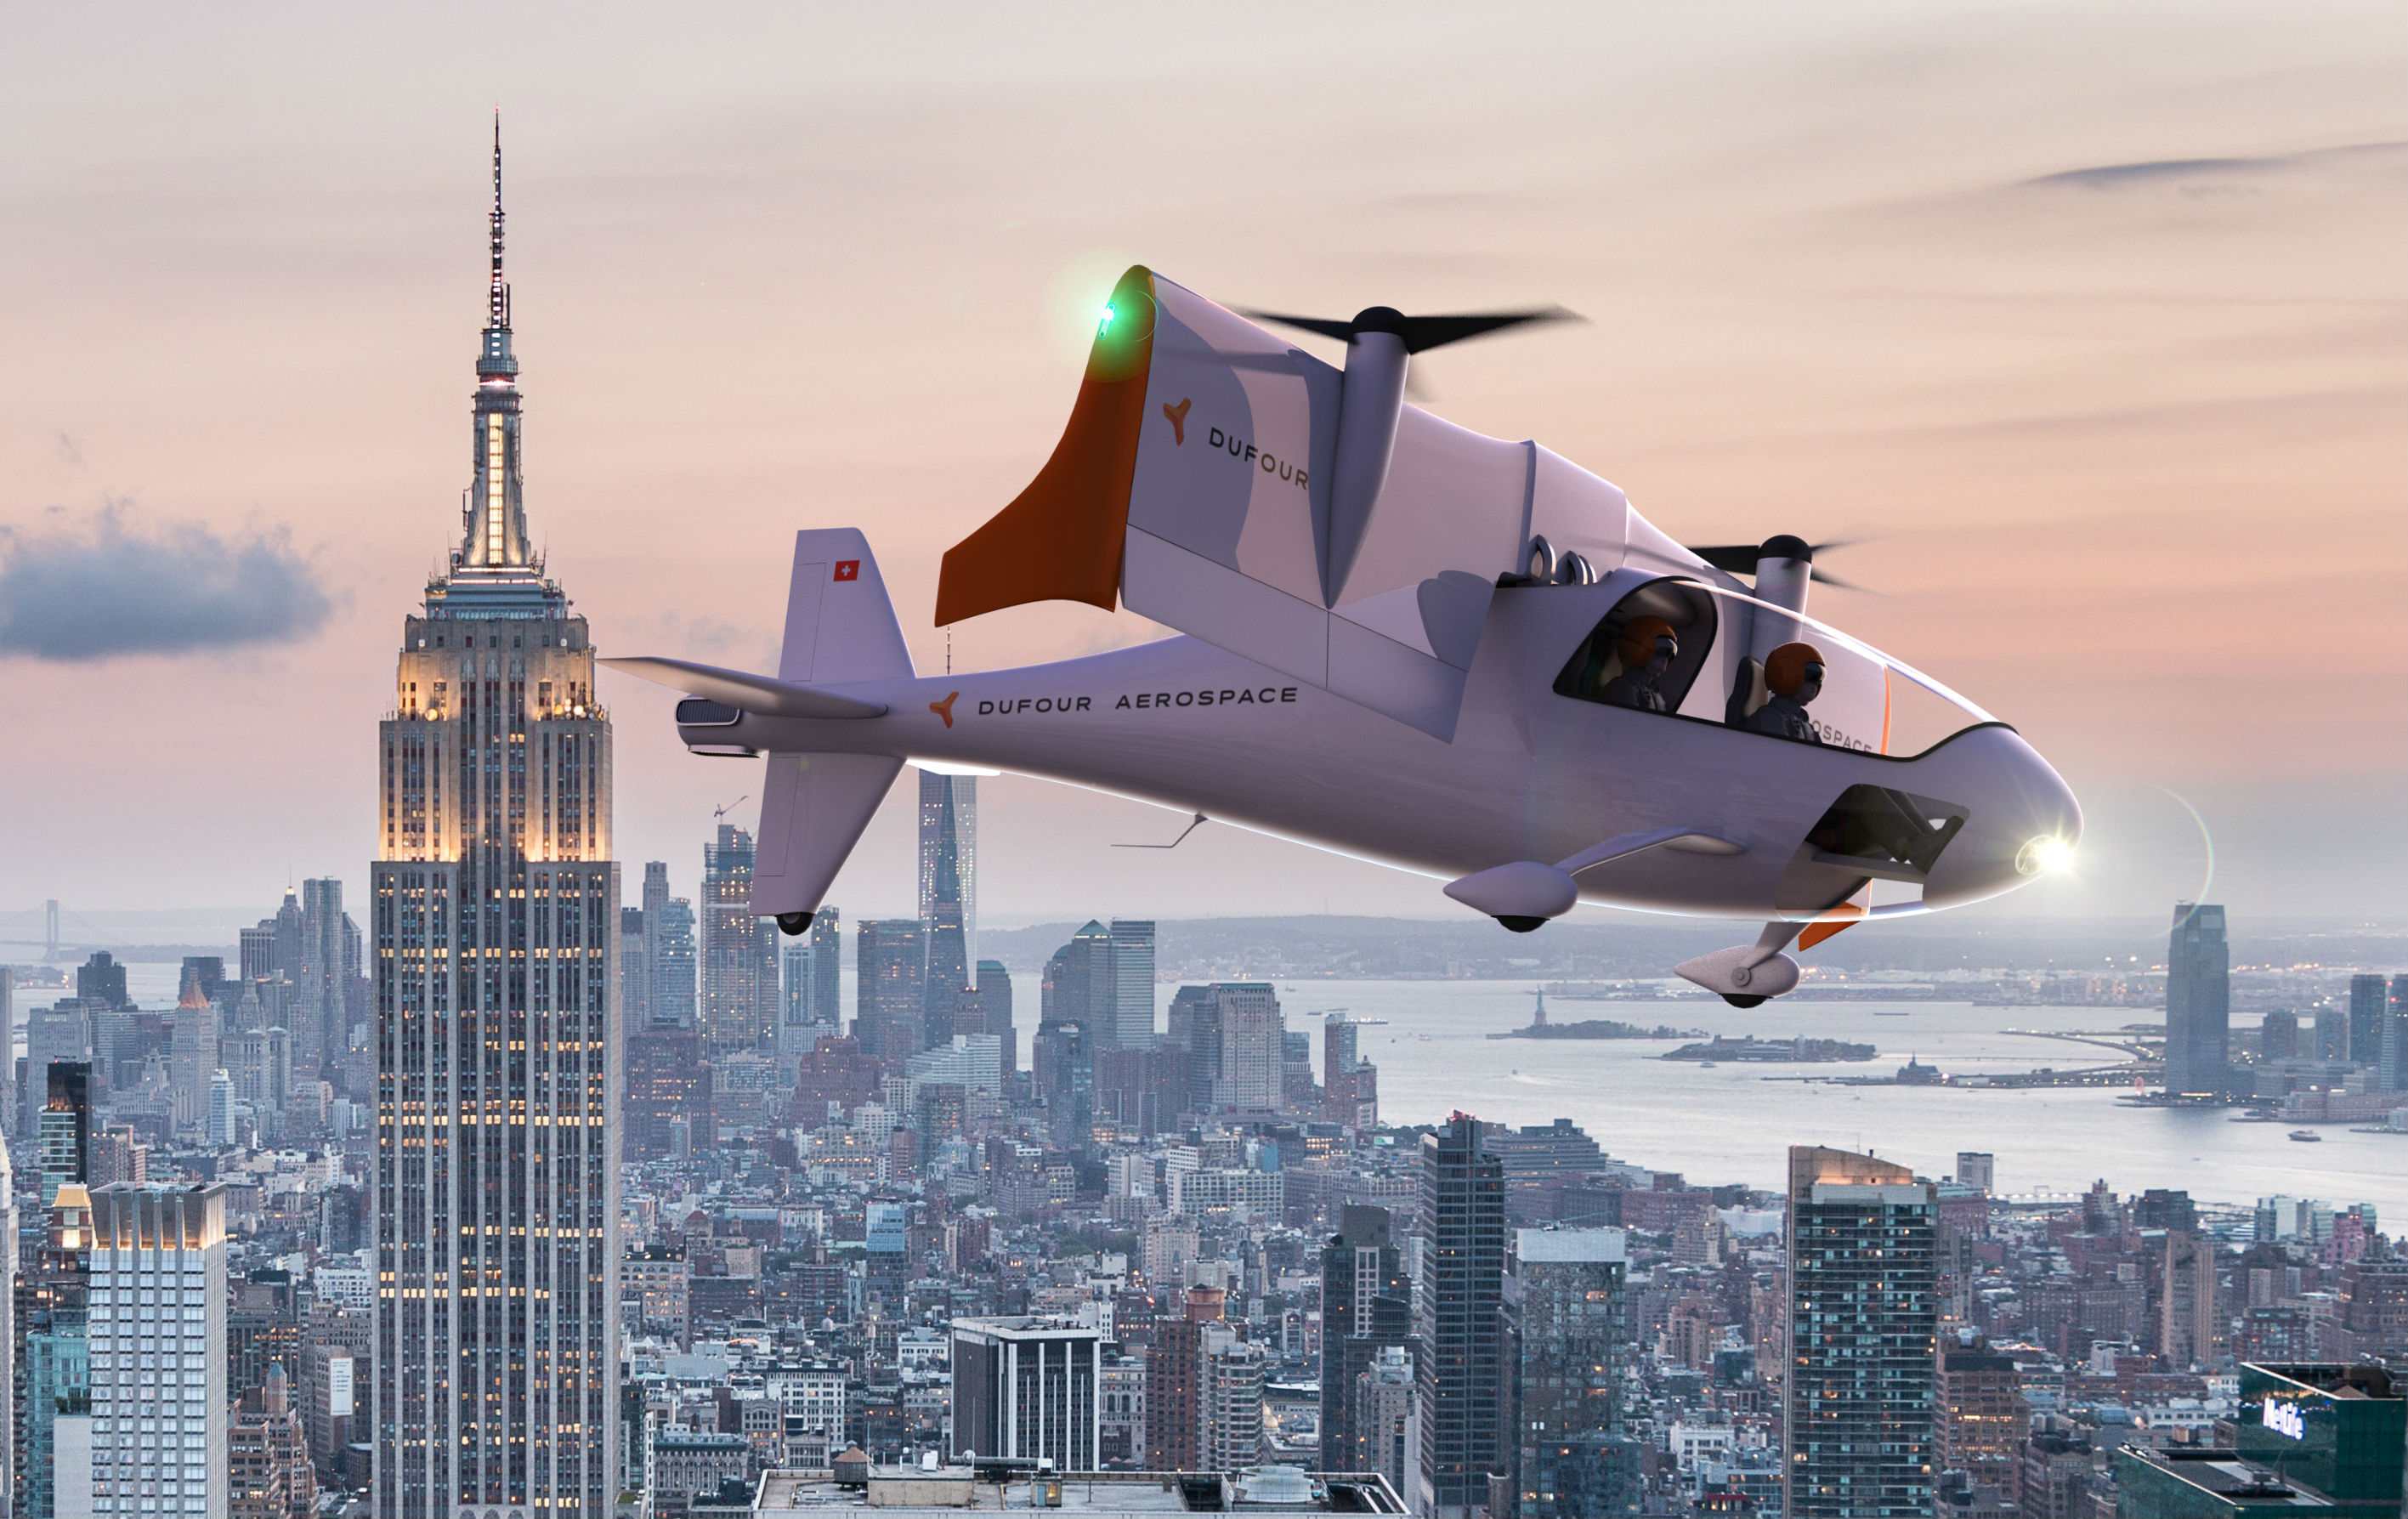 The aEro 2 will offer fast air transportation at the same cost per kilometer as a car, but with less environmental impact.